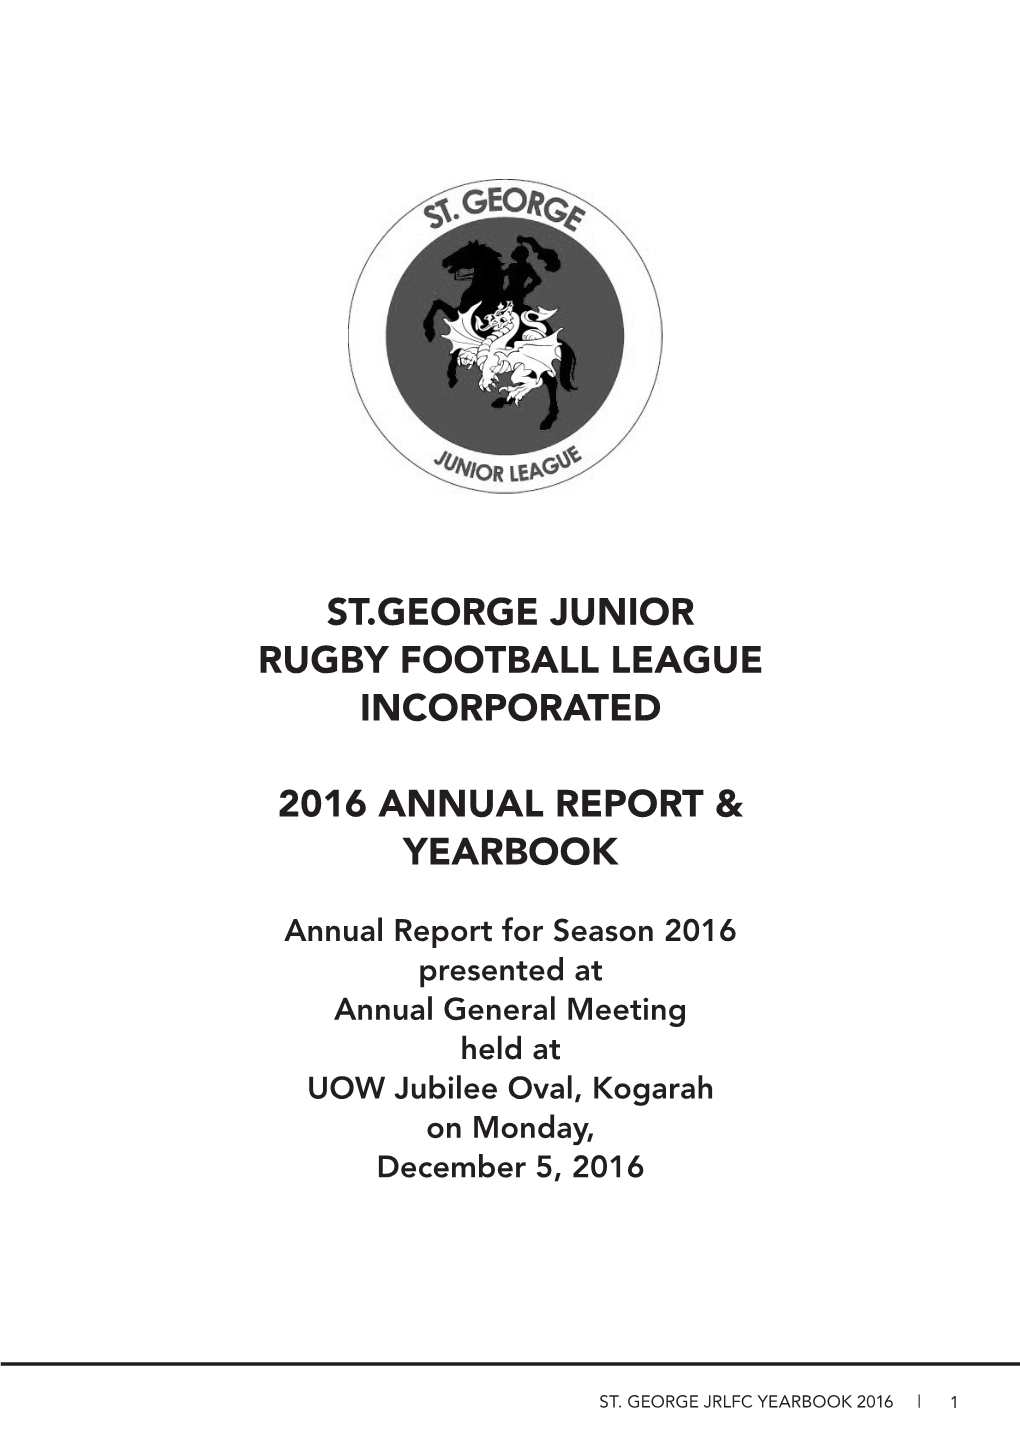 St.George Junior Rugby Football League Incorporated 2016 Annual Report